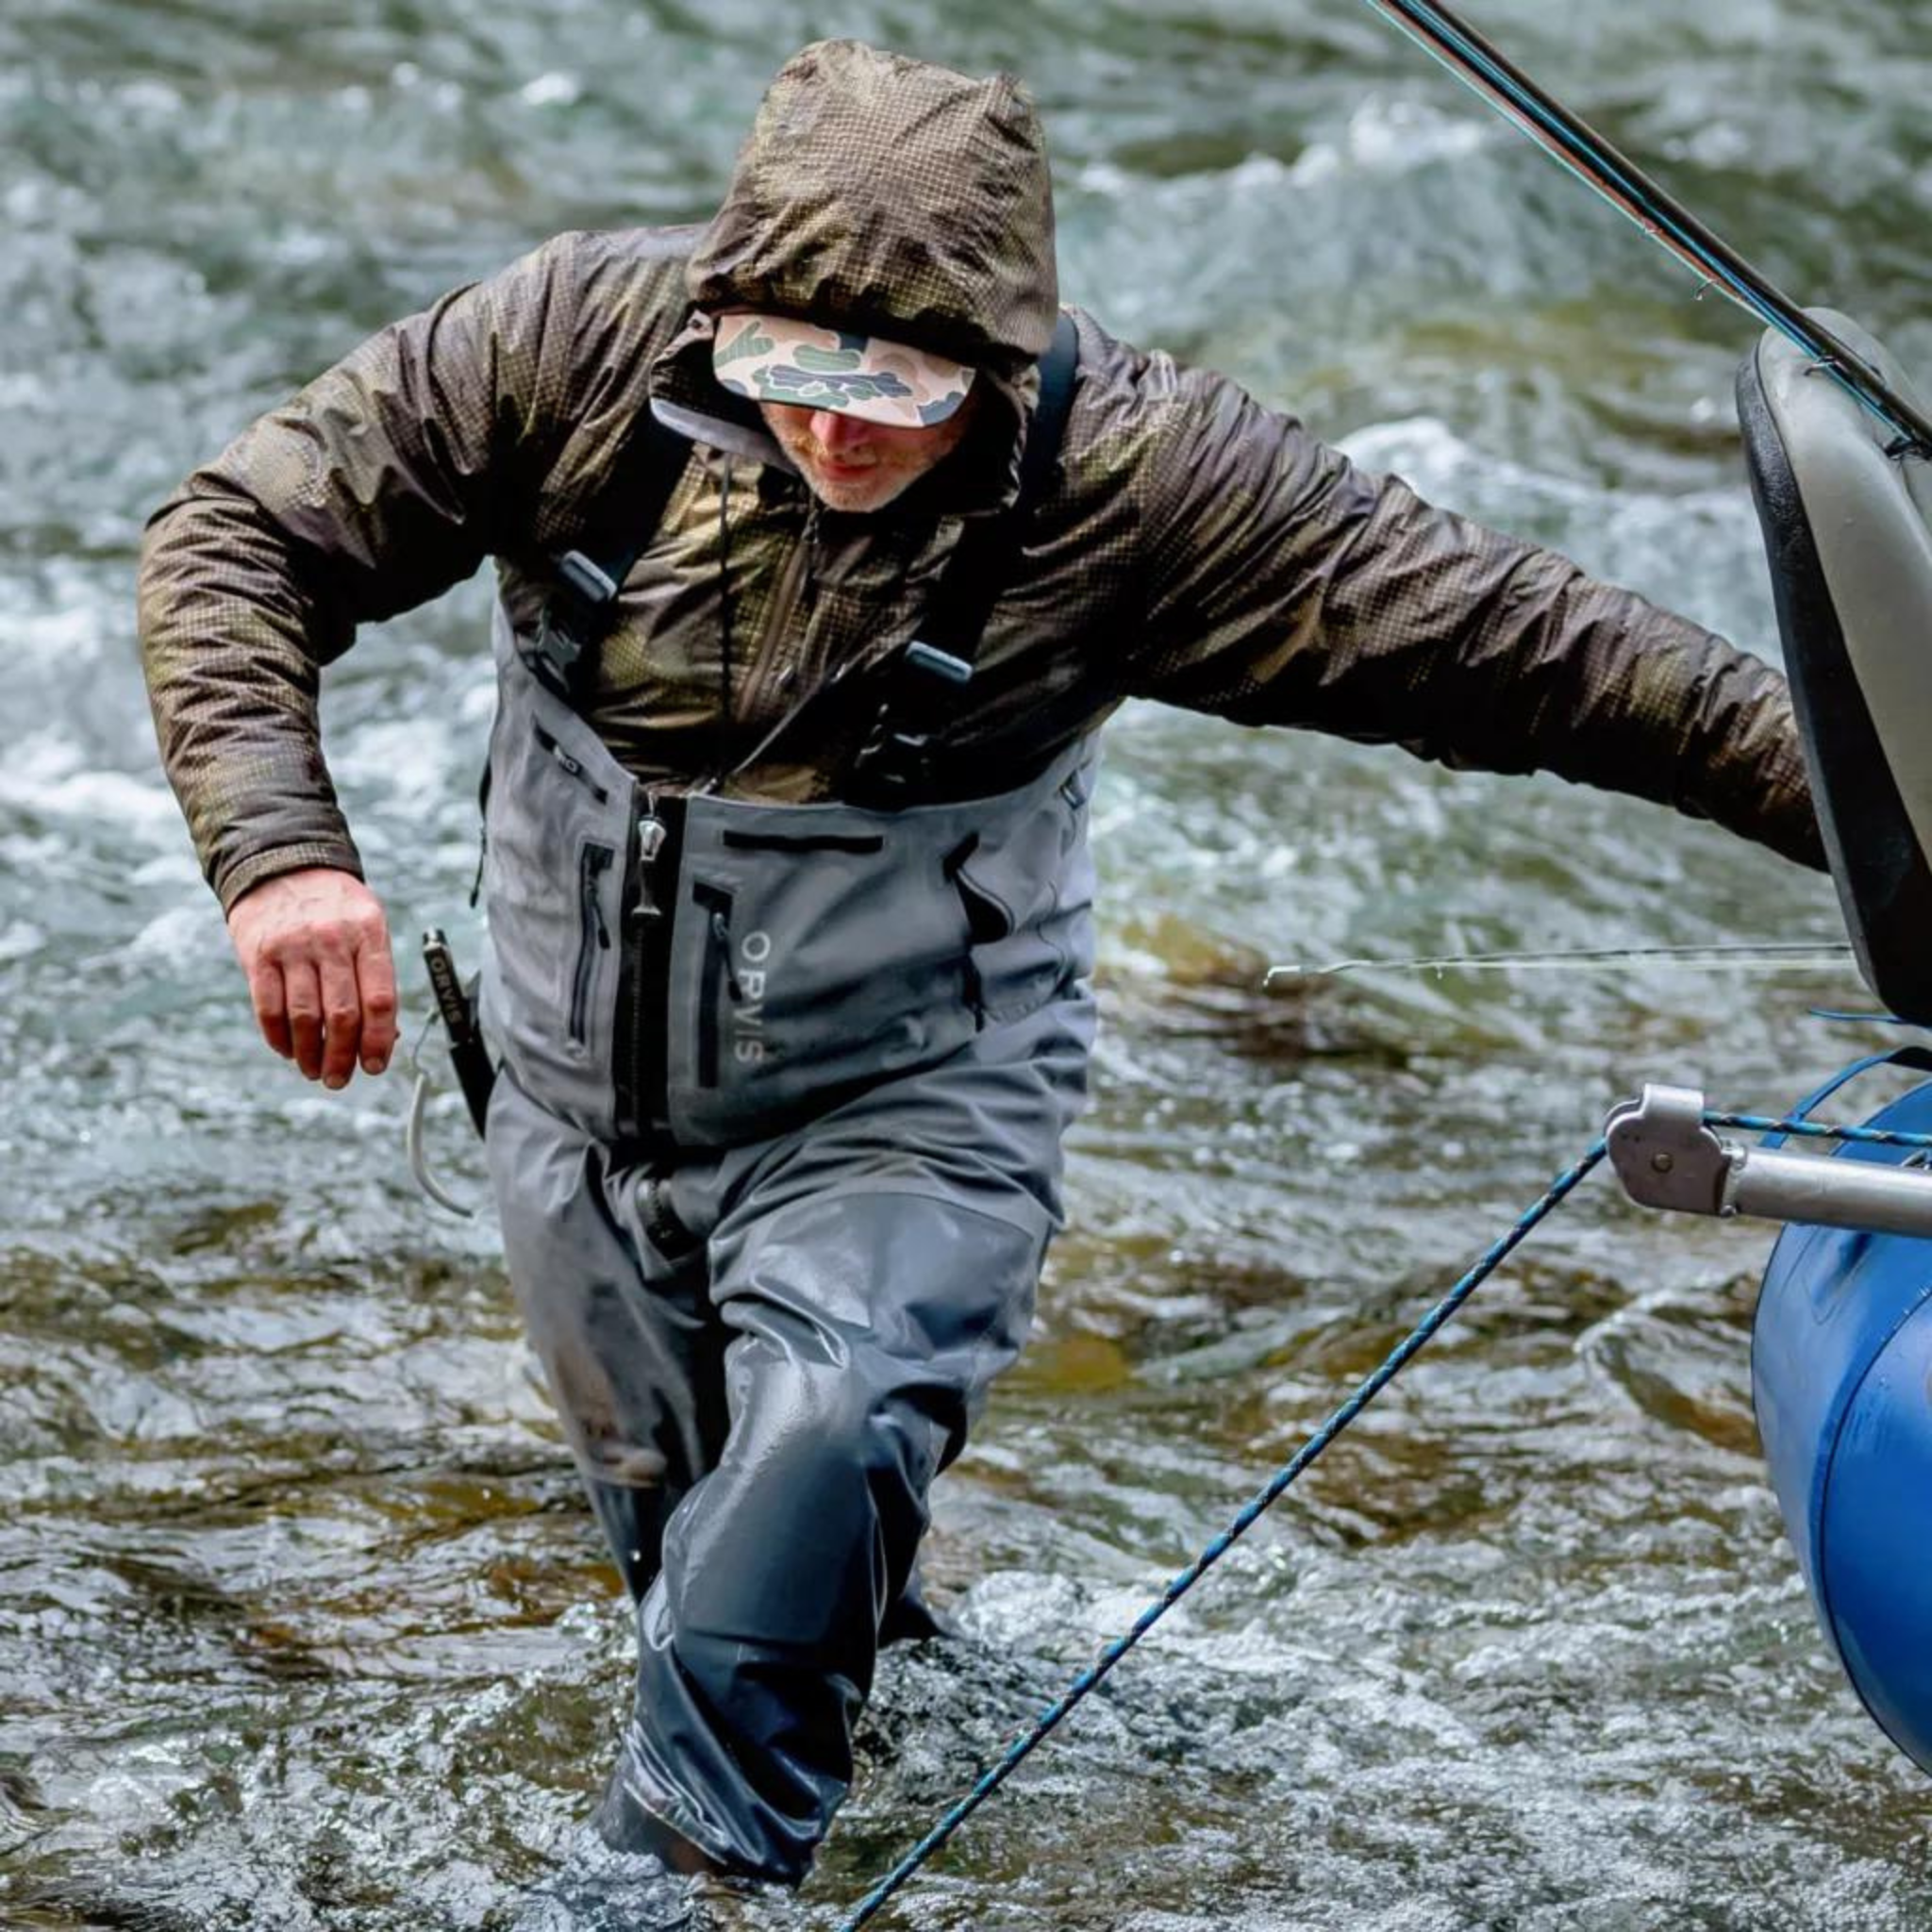 Women's Waders Perfected by Female Anglers' Expertise - Fly Fisherman